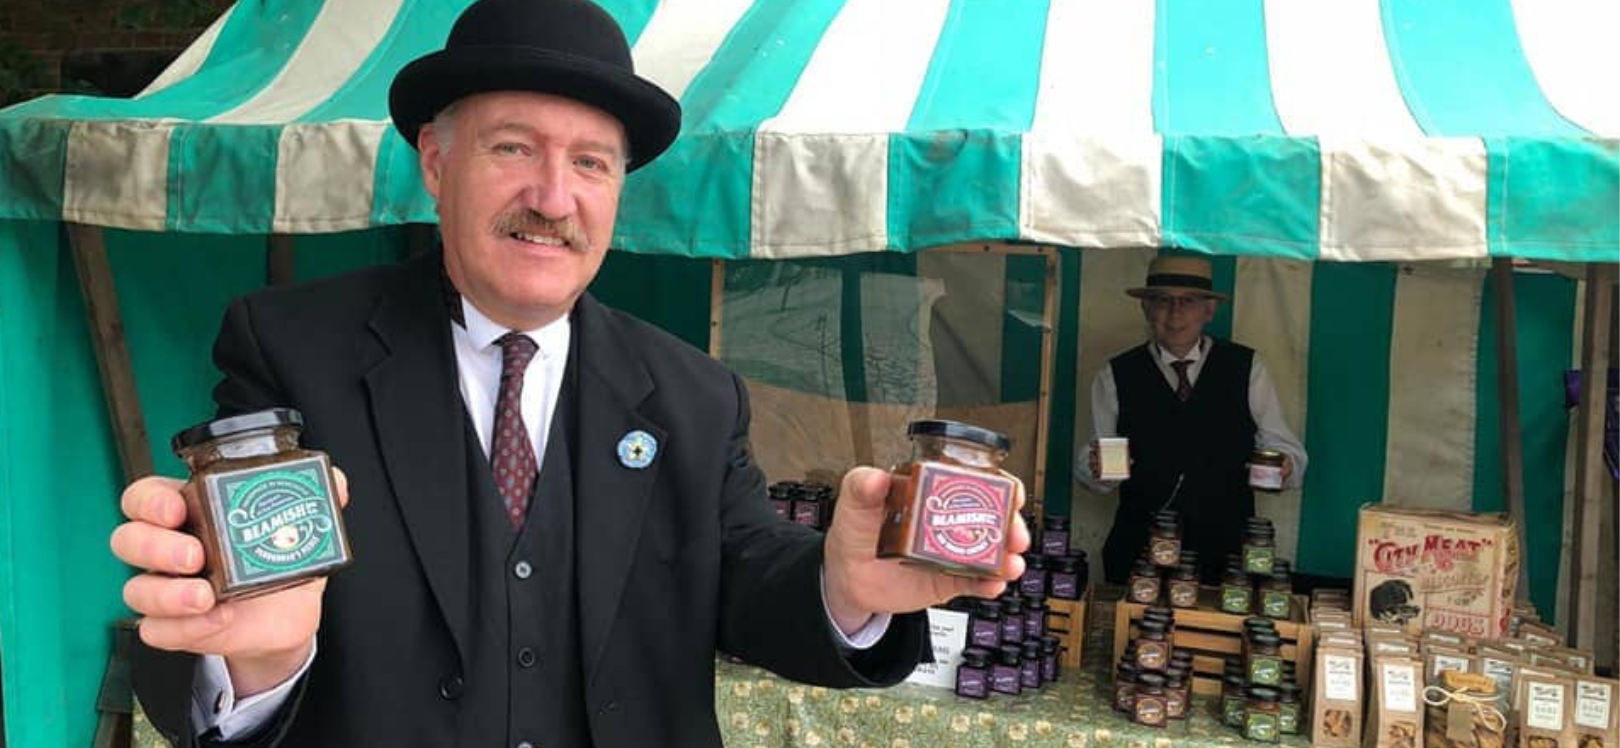 A man holding some bottles at a market in Beamish Museum